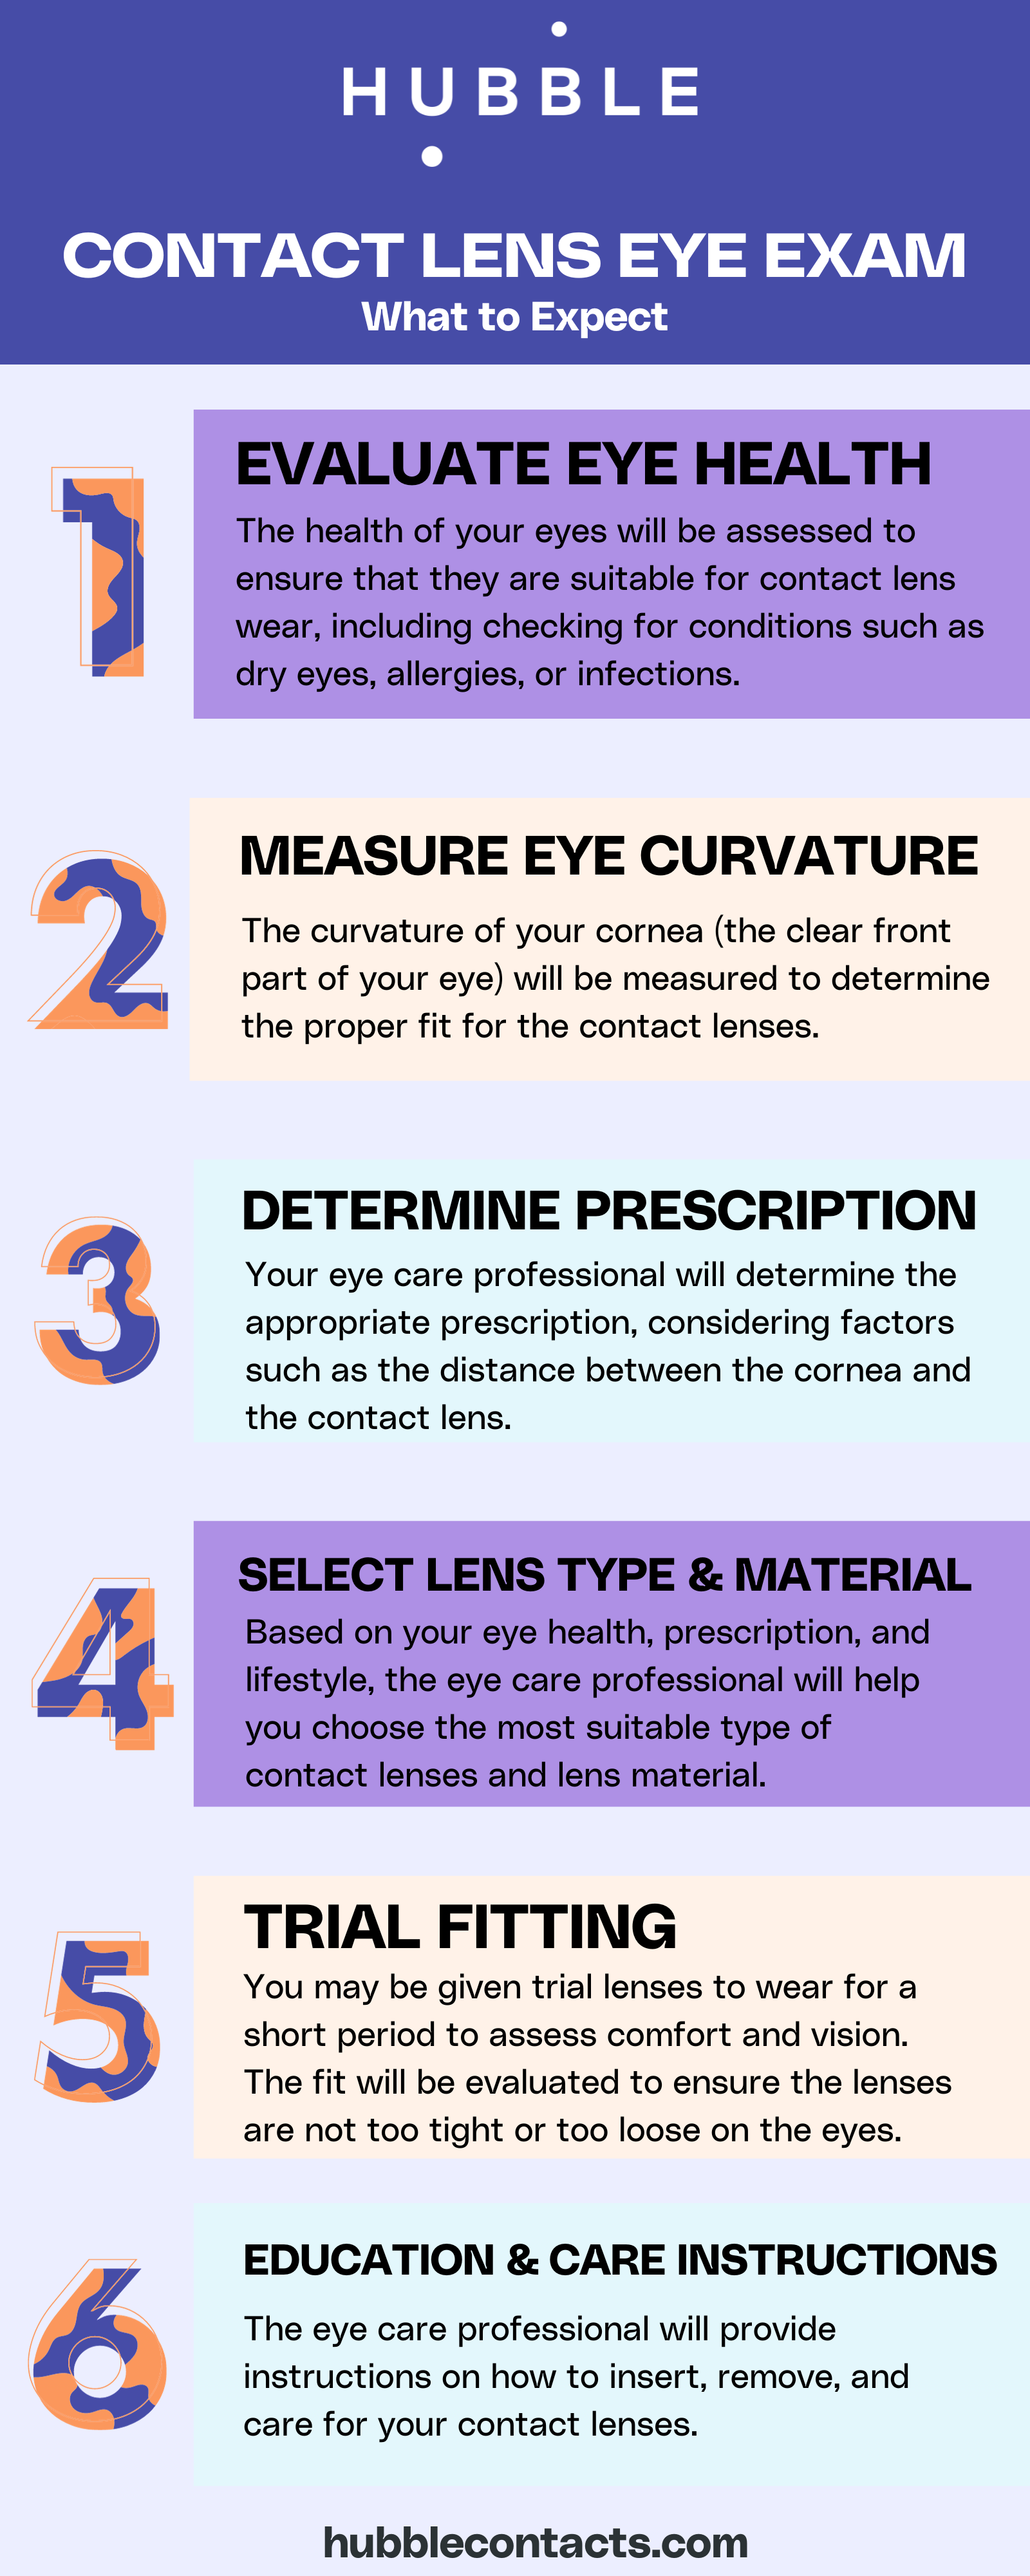 Contact Lens Eye Exam: What to Expect Infographic